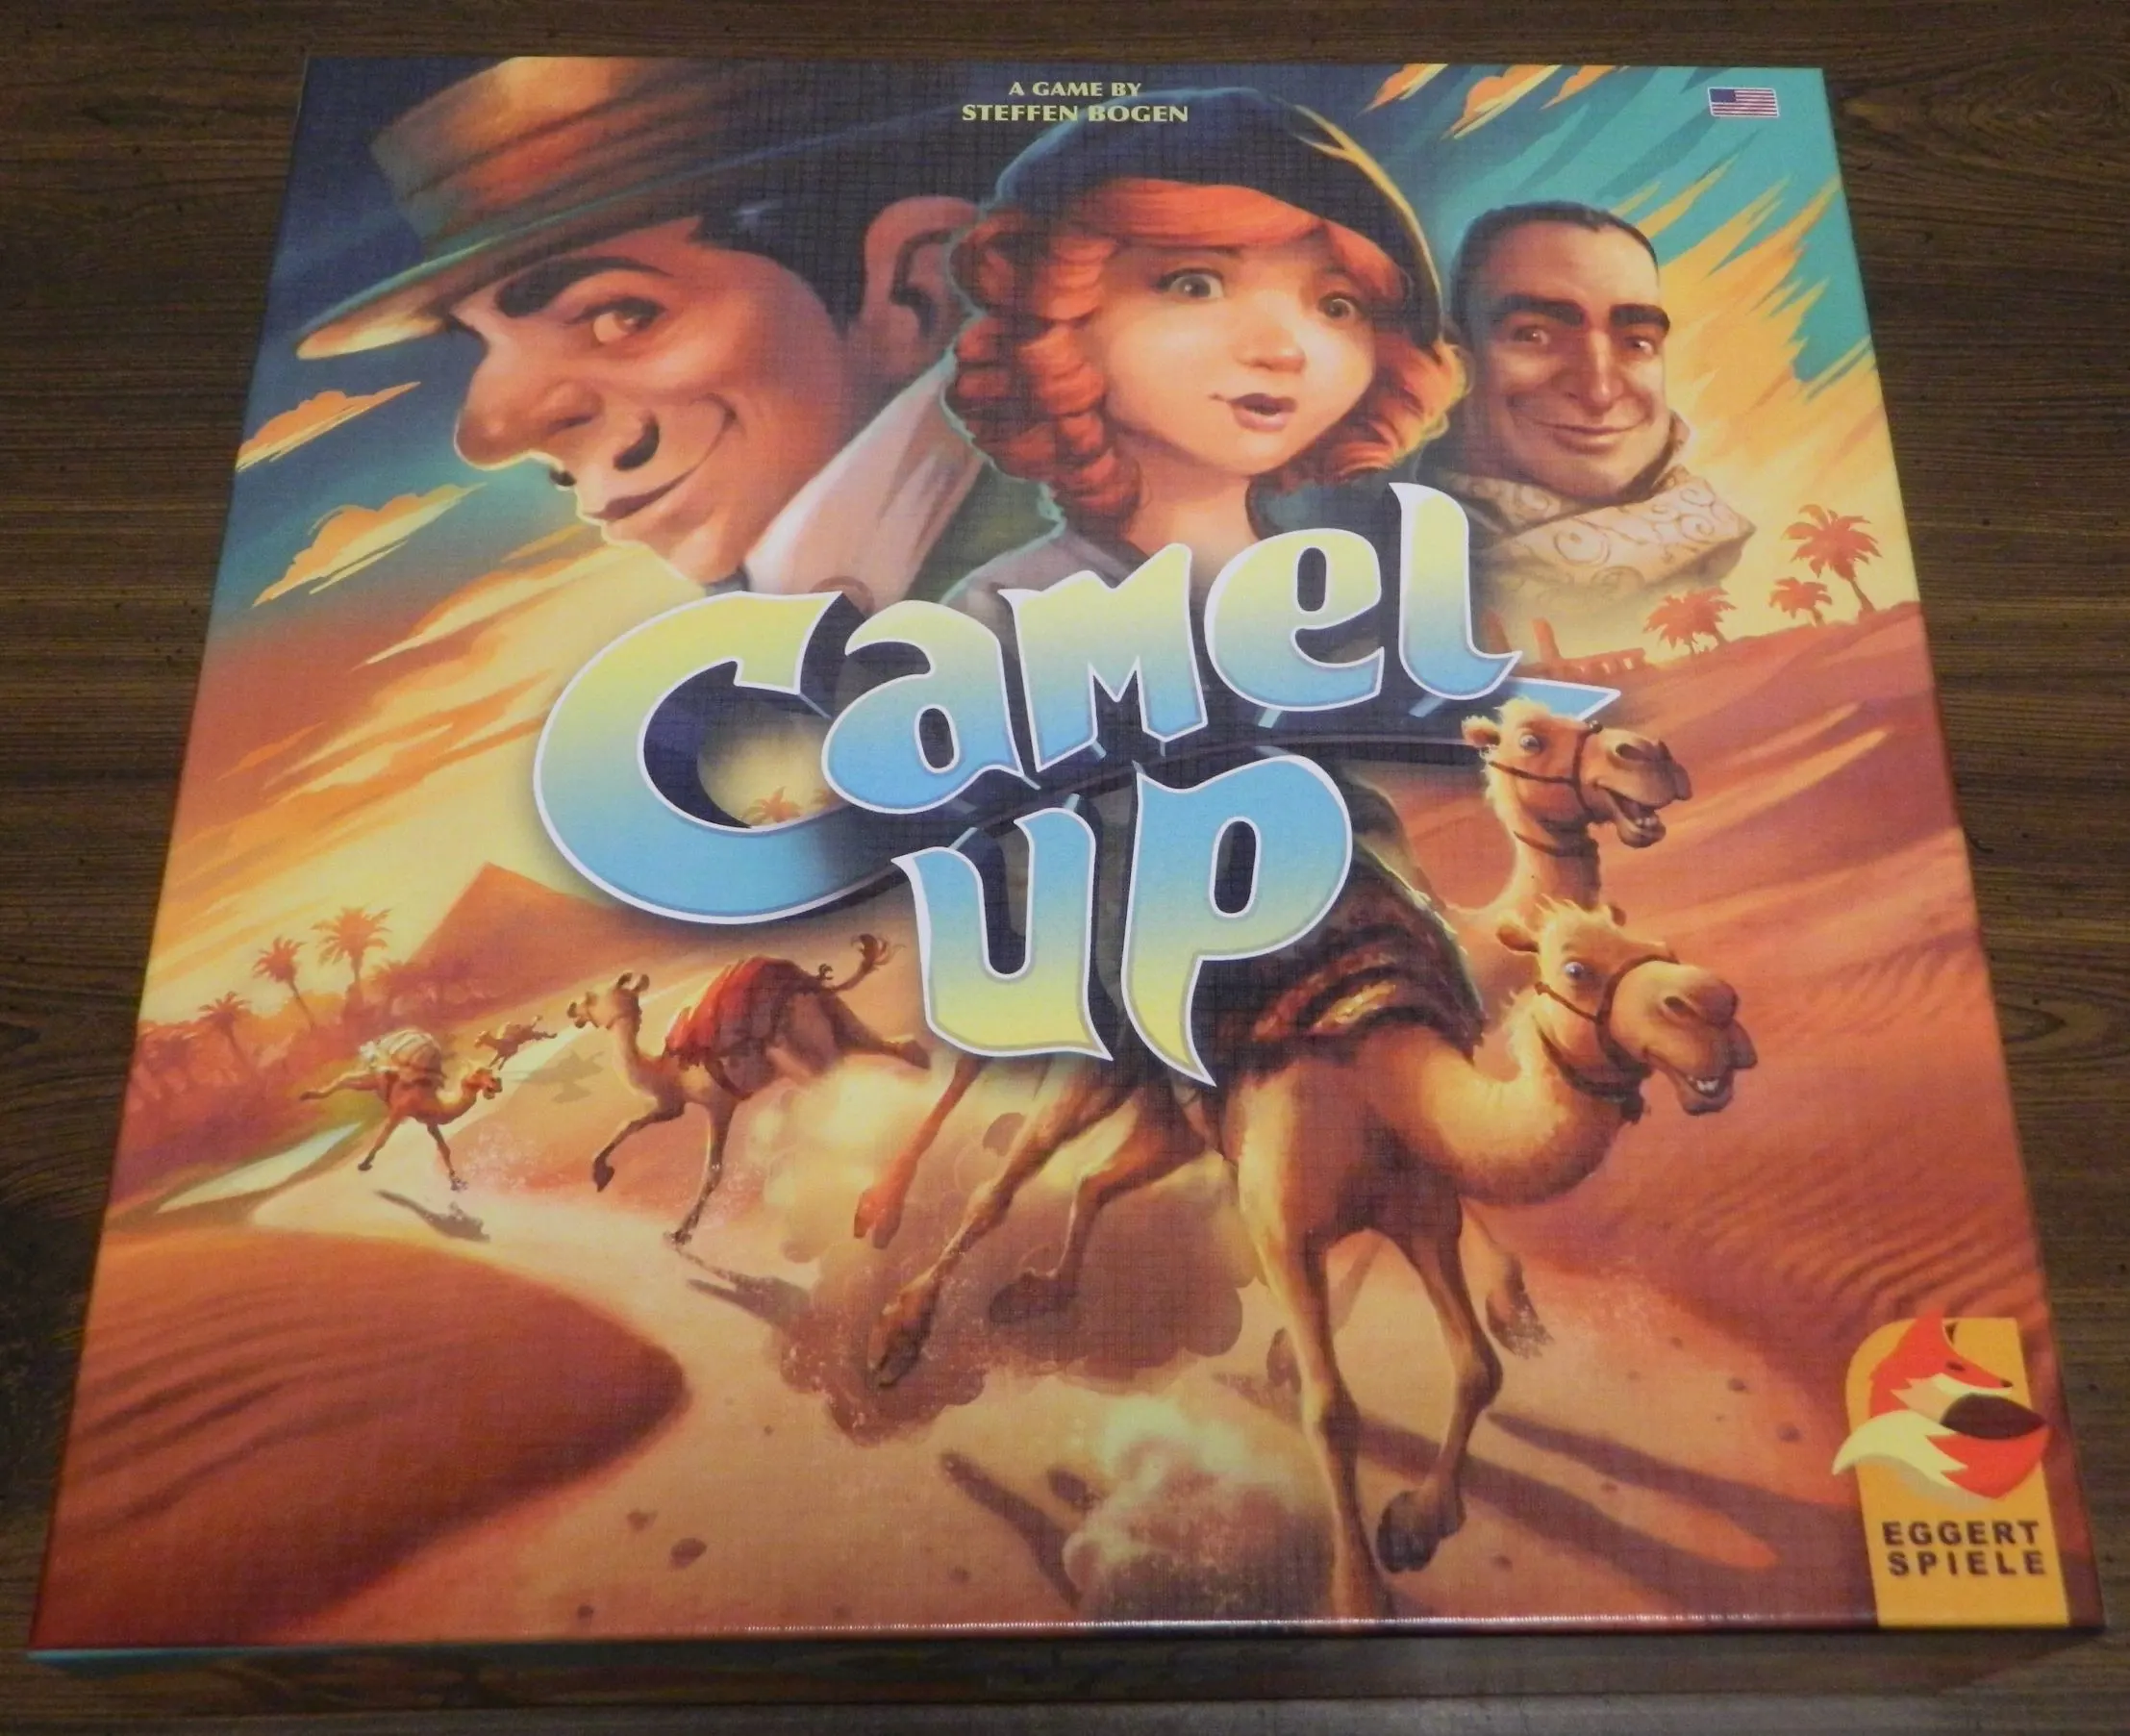 Camel Up: Off Season swaps the board game's racing for bidding on bazaars